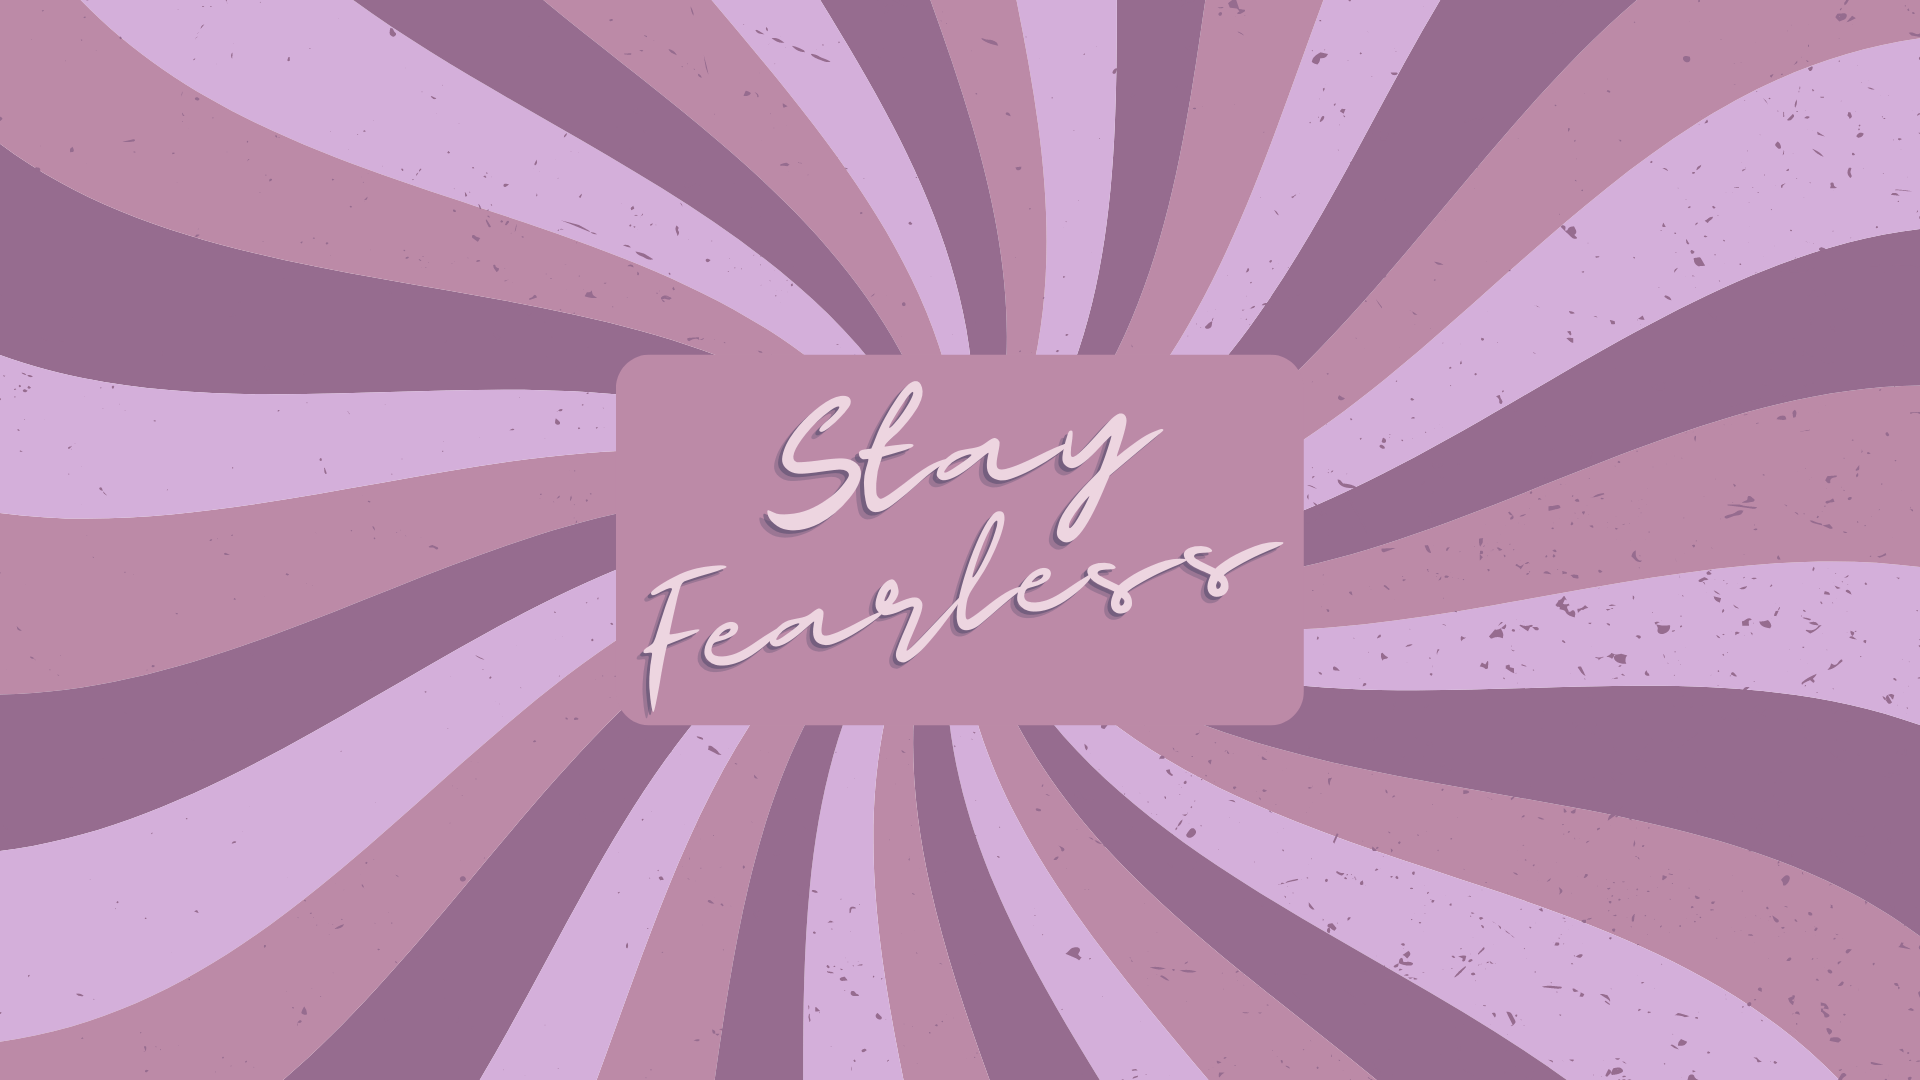 A purple and pink sunburst background with the words 